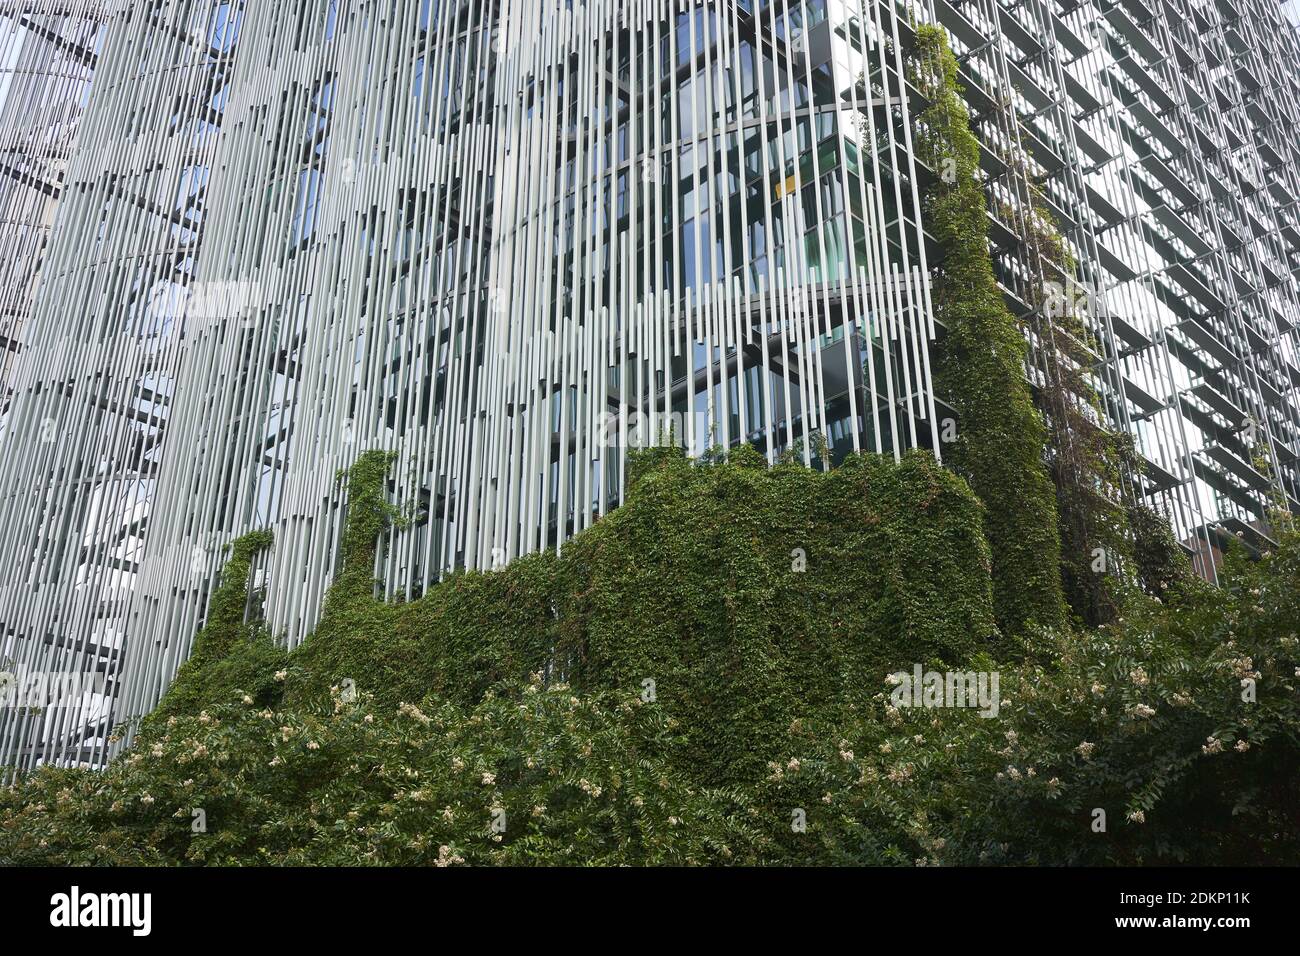 The Edith Green–Wendell Wyatt Federal Building in downtown Portland. Eco-friendly building exterior. Stock Photo